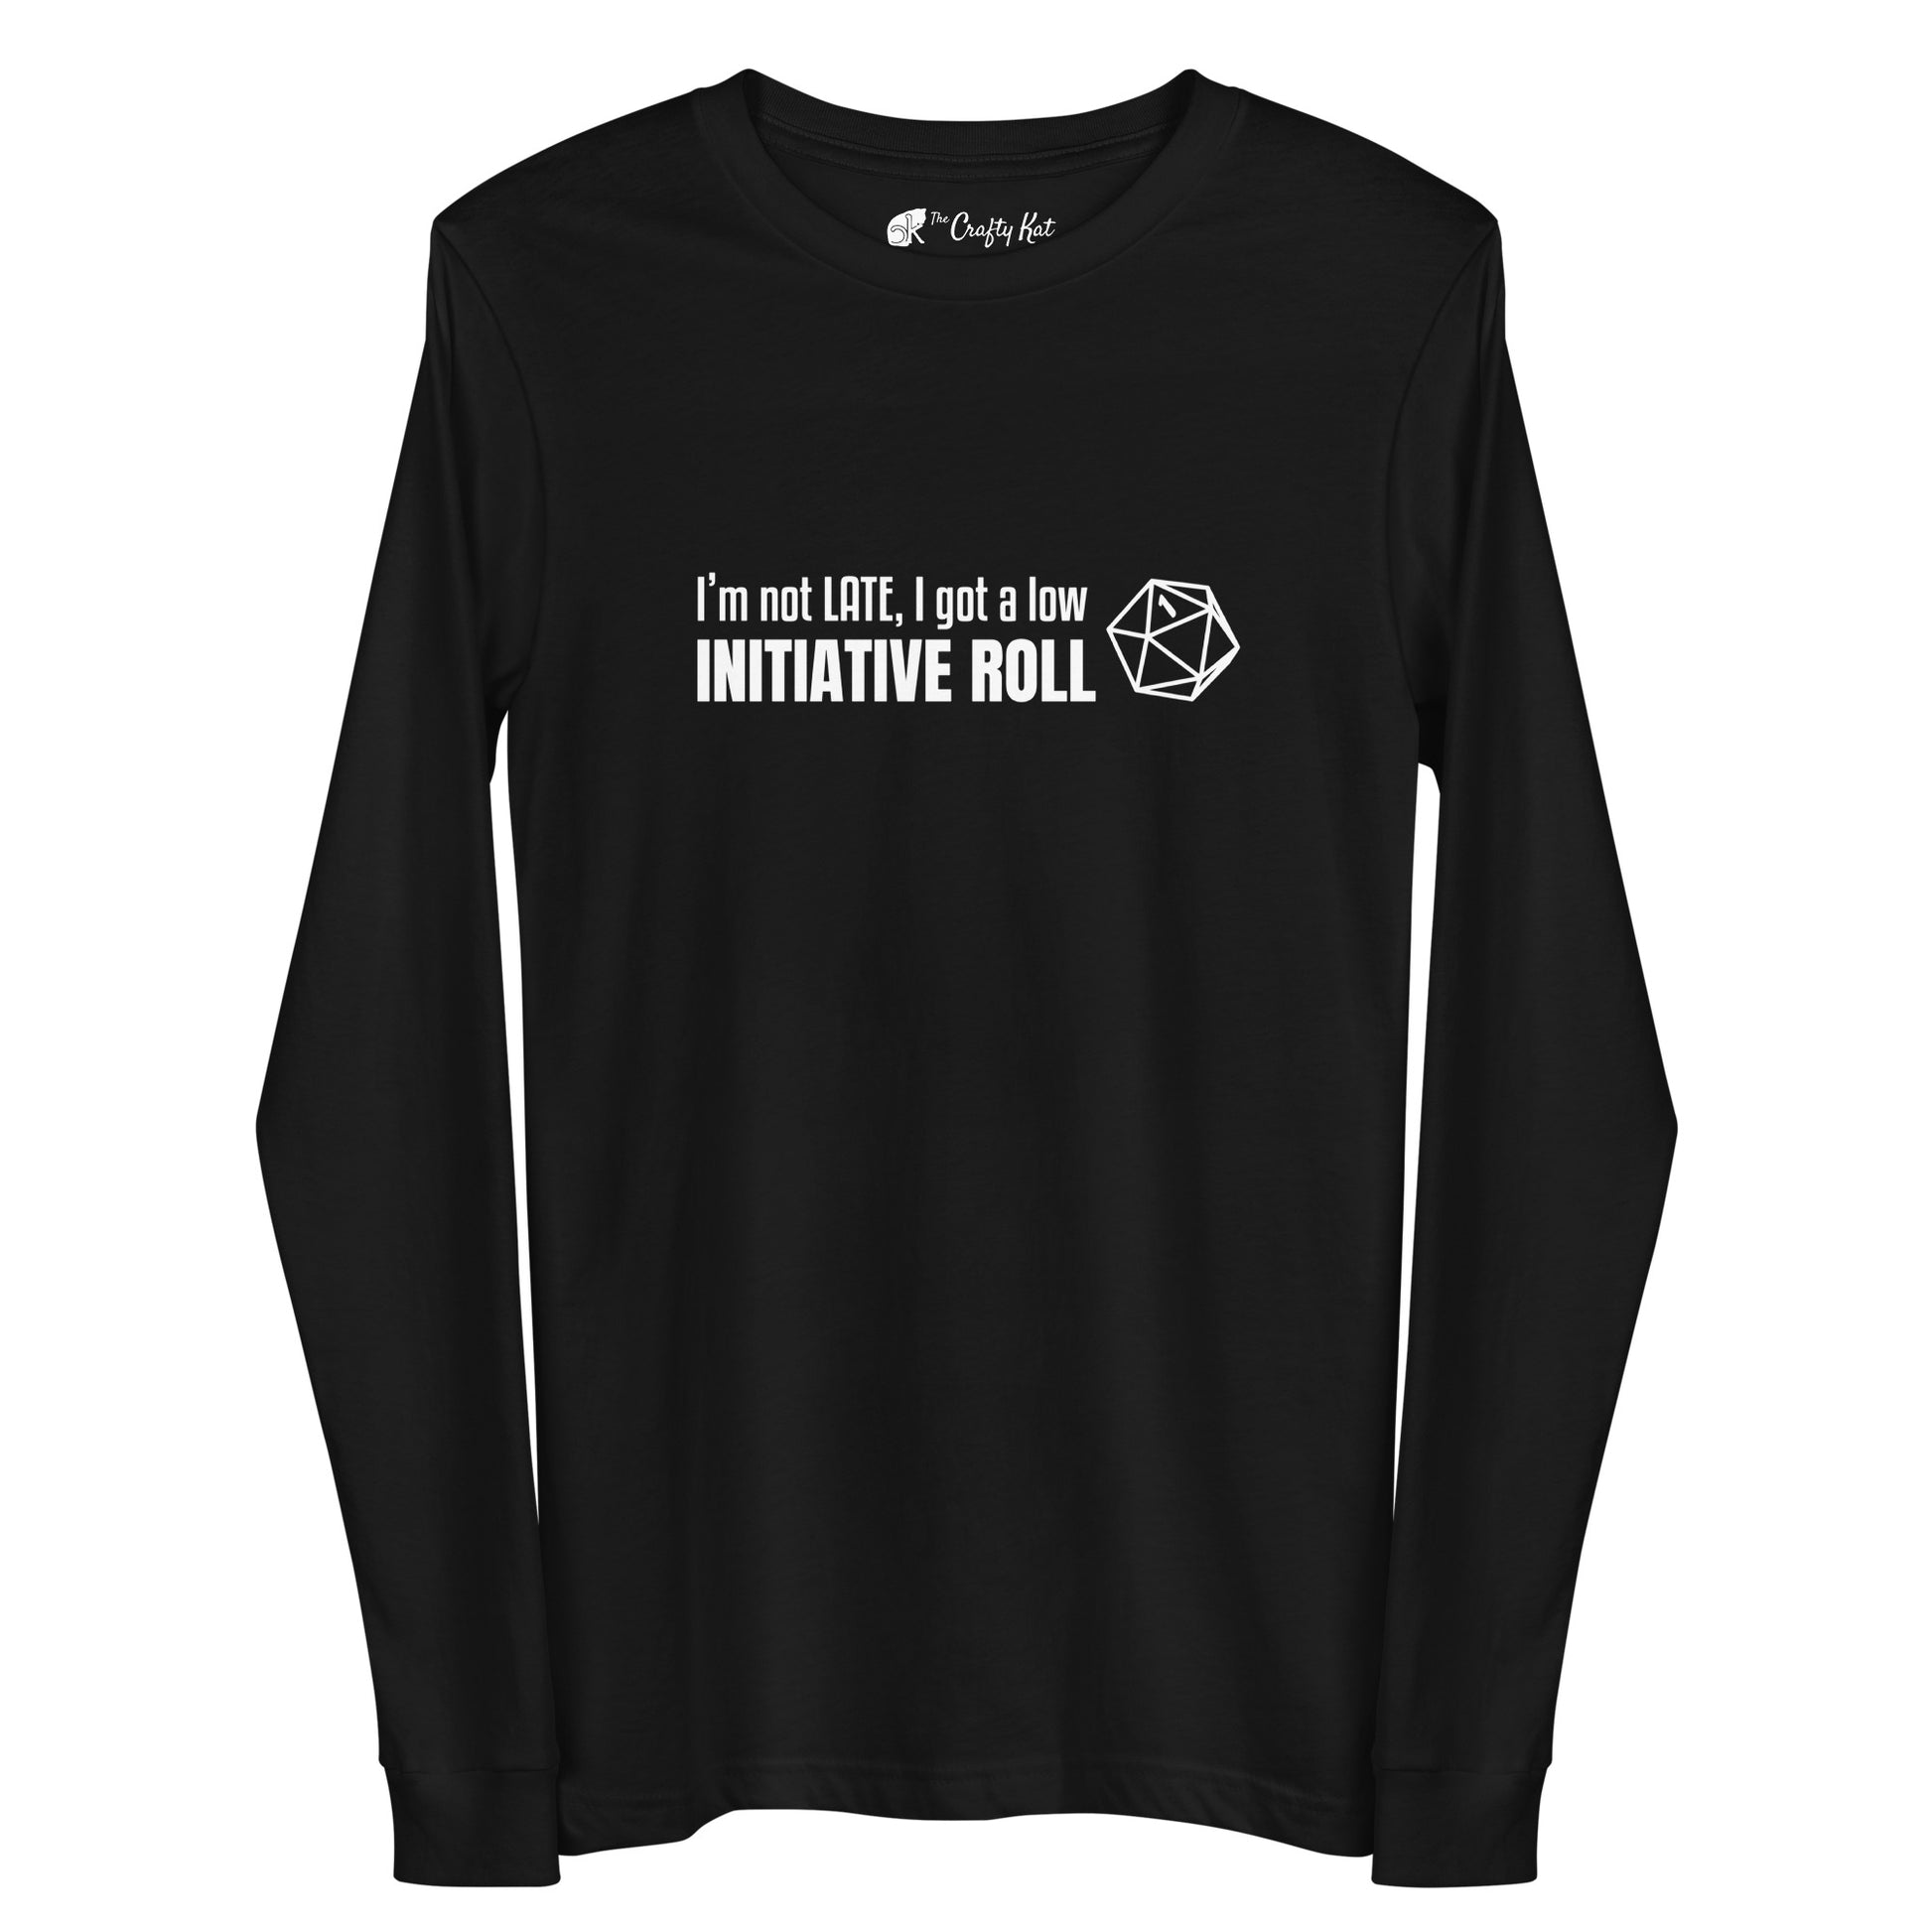 Black long-sleeve tee with a graphic of a d20 (twenty-sided die) showing a roll of "1" and text: "I'm not LATE, I got a low INITIATIVE ROLL"